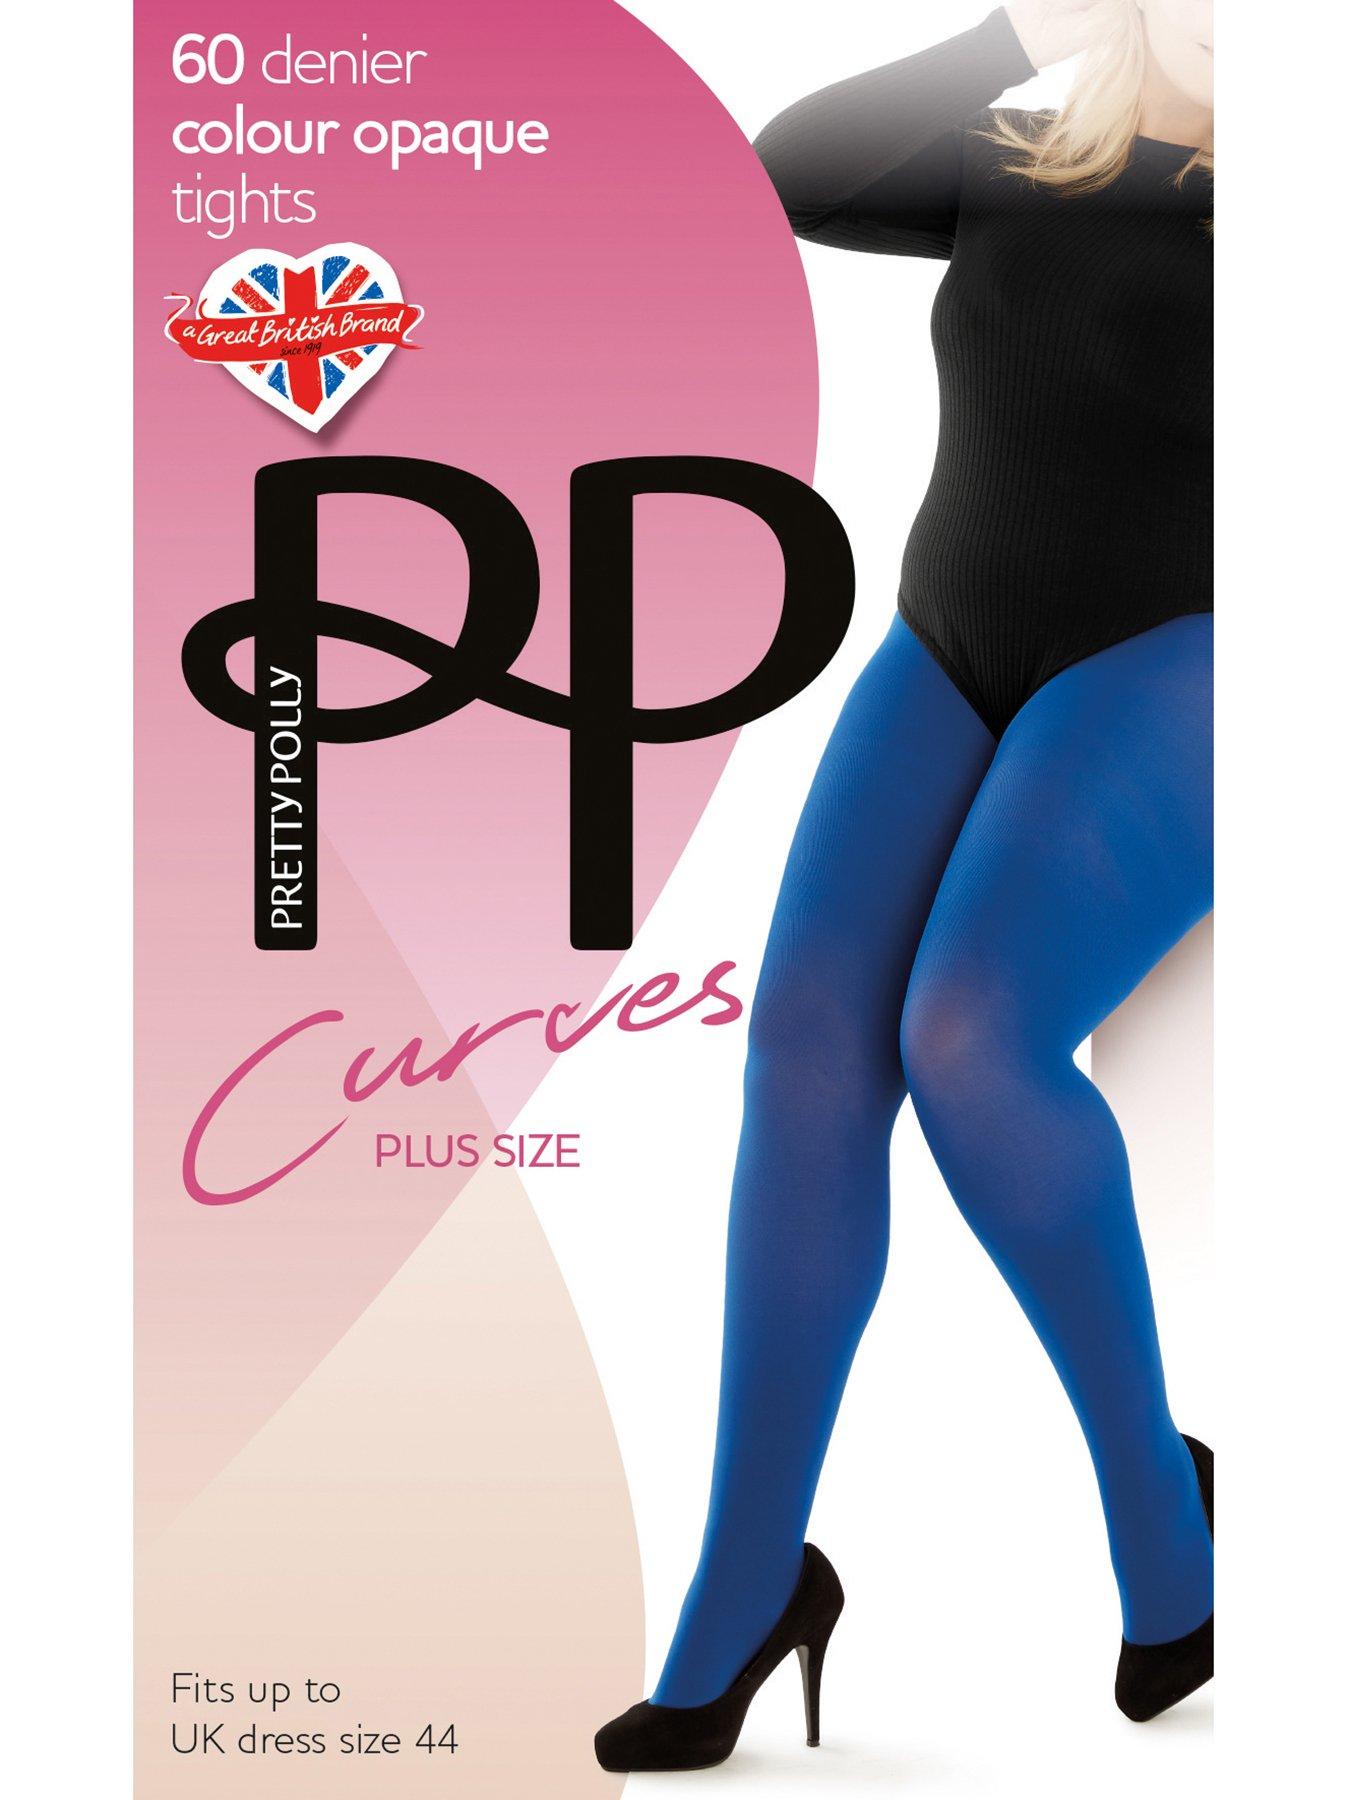 Pretty Polly Ladder Resist Sheer Curve Tights 3 Pair Pack | The Tight Spot